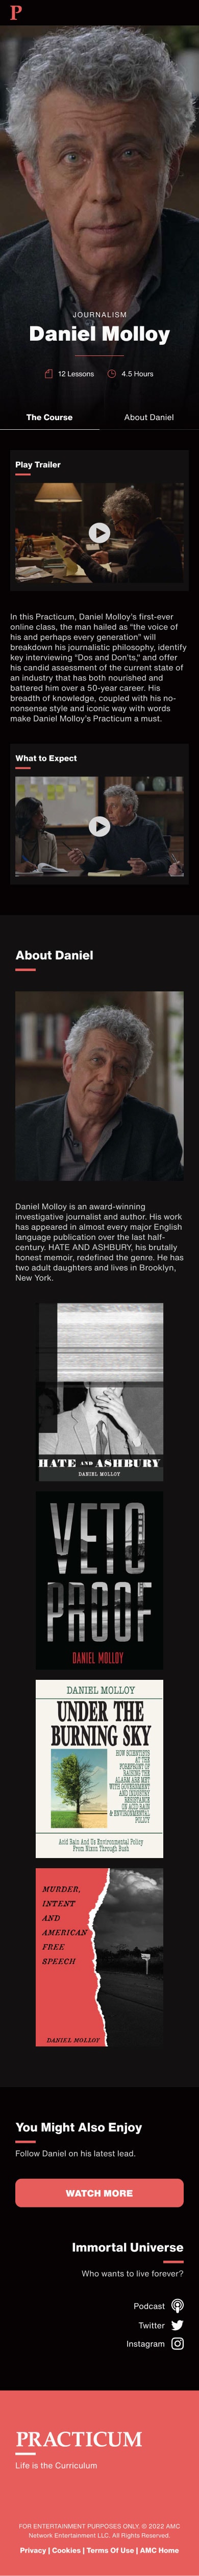 A complete page-length image of the mobile design for an in-world website for AMC's series Interview with a Vampire. It is a journalism course on a site called Practicum conducted by the character of Daniel Molloy, portrayed by Eric Bogosian. It features a hero image of Daniel, an outline of the course, a trailer, biographical details, and the fictional covers of the books the character has written.